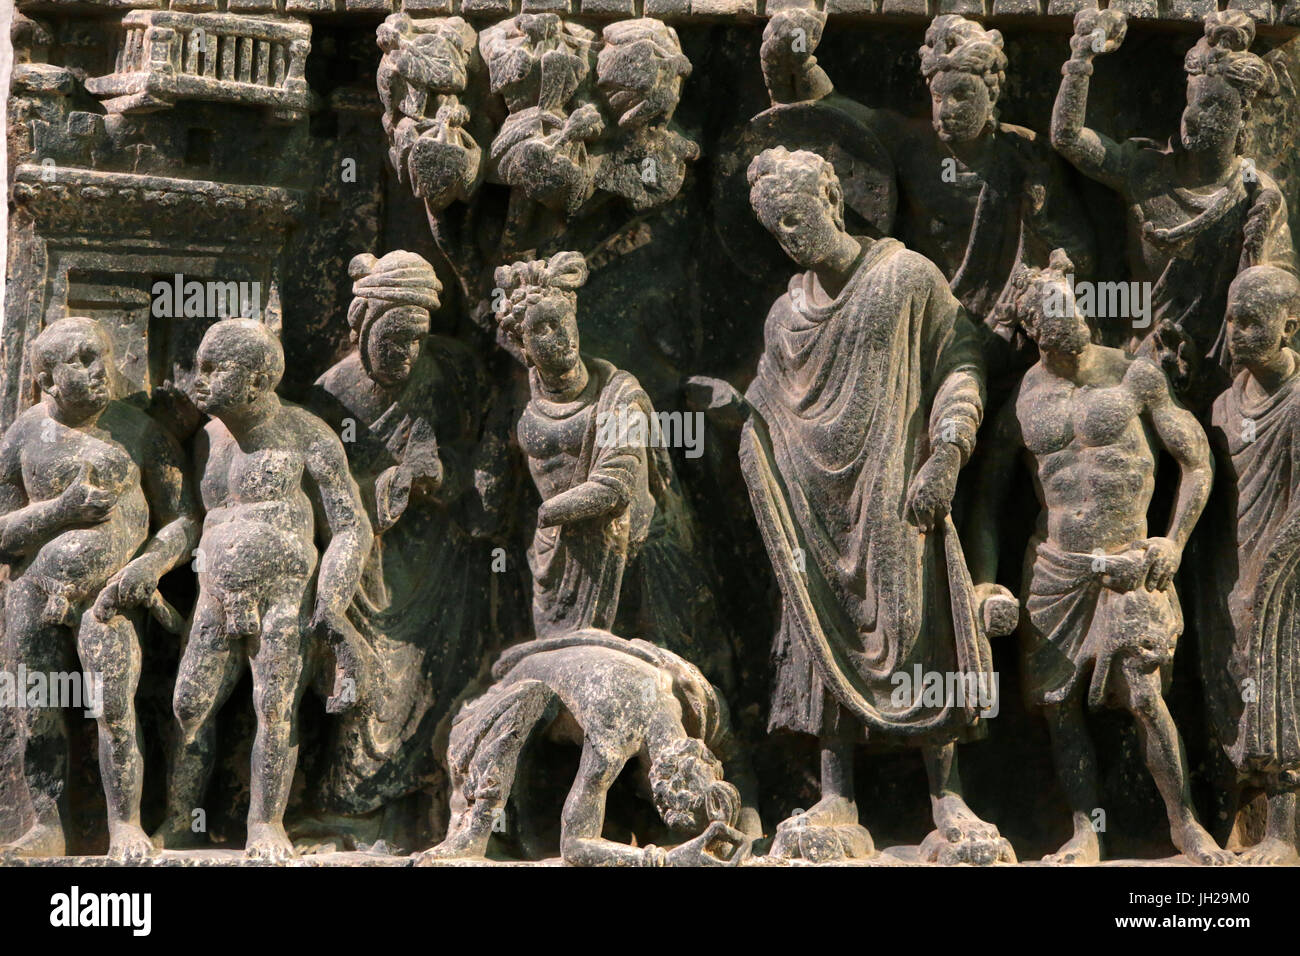 The Victoria and Albert Museum. Relief showing an attempt on the Buddha's life. 100-200.  Schist. Gandhara/Northwest Pakistan. United kingdom. Stock Photo